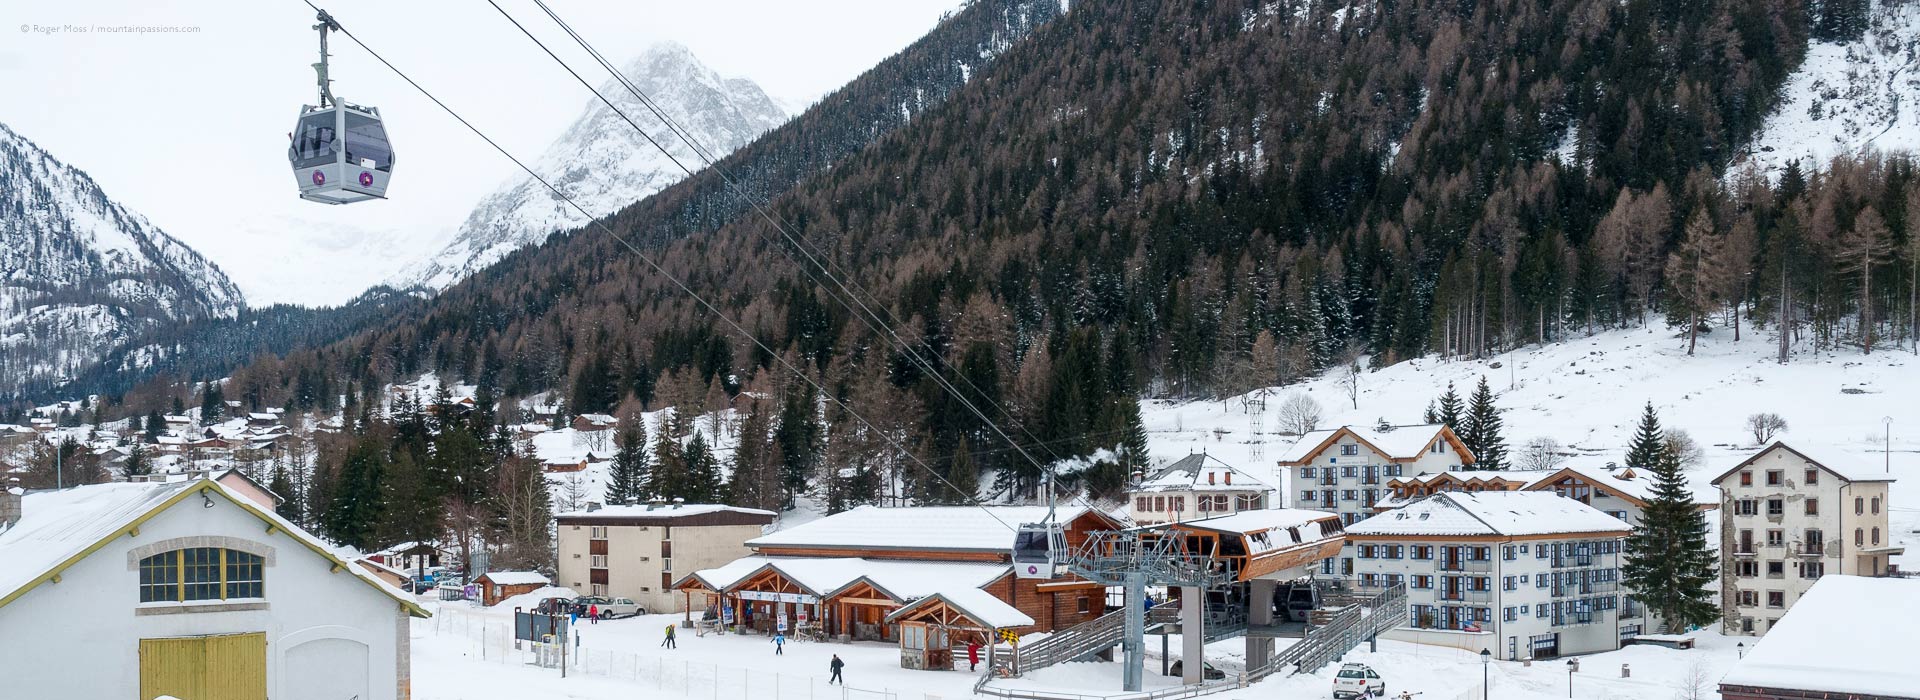 Wide view of Vallorcine, showing gondola ski lift and valley